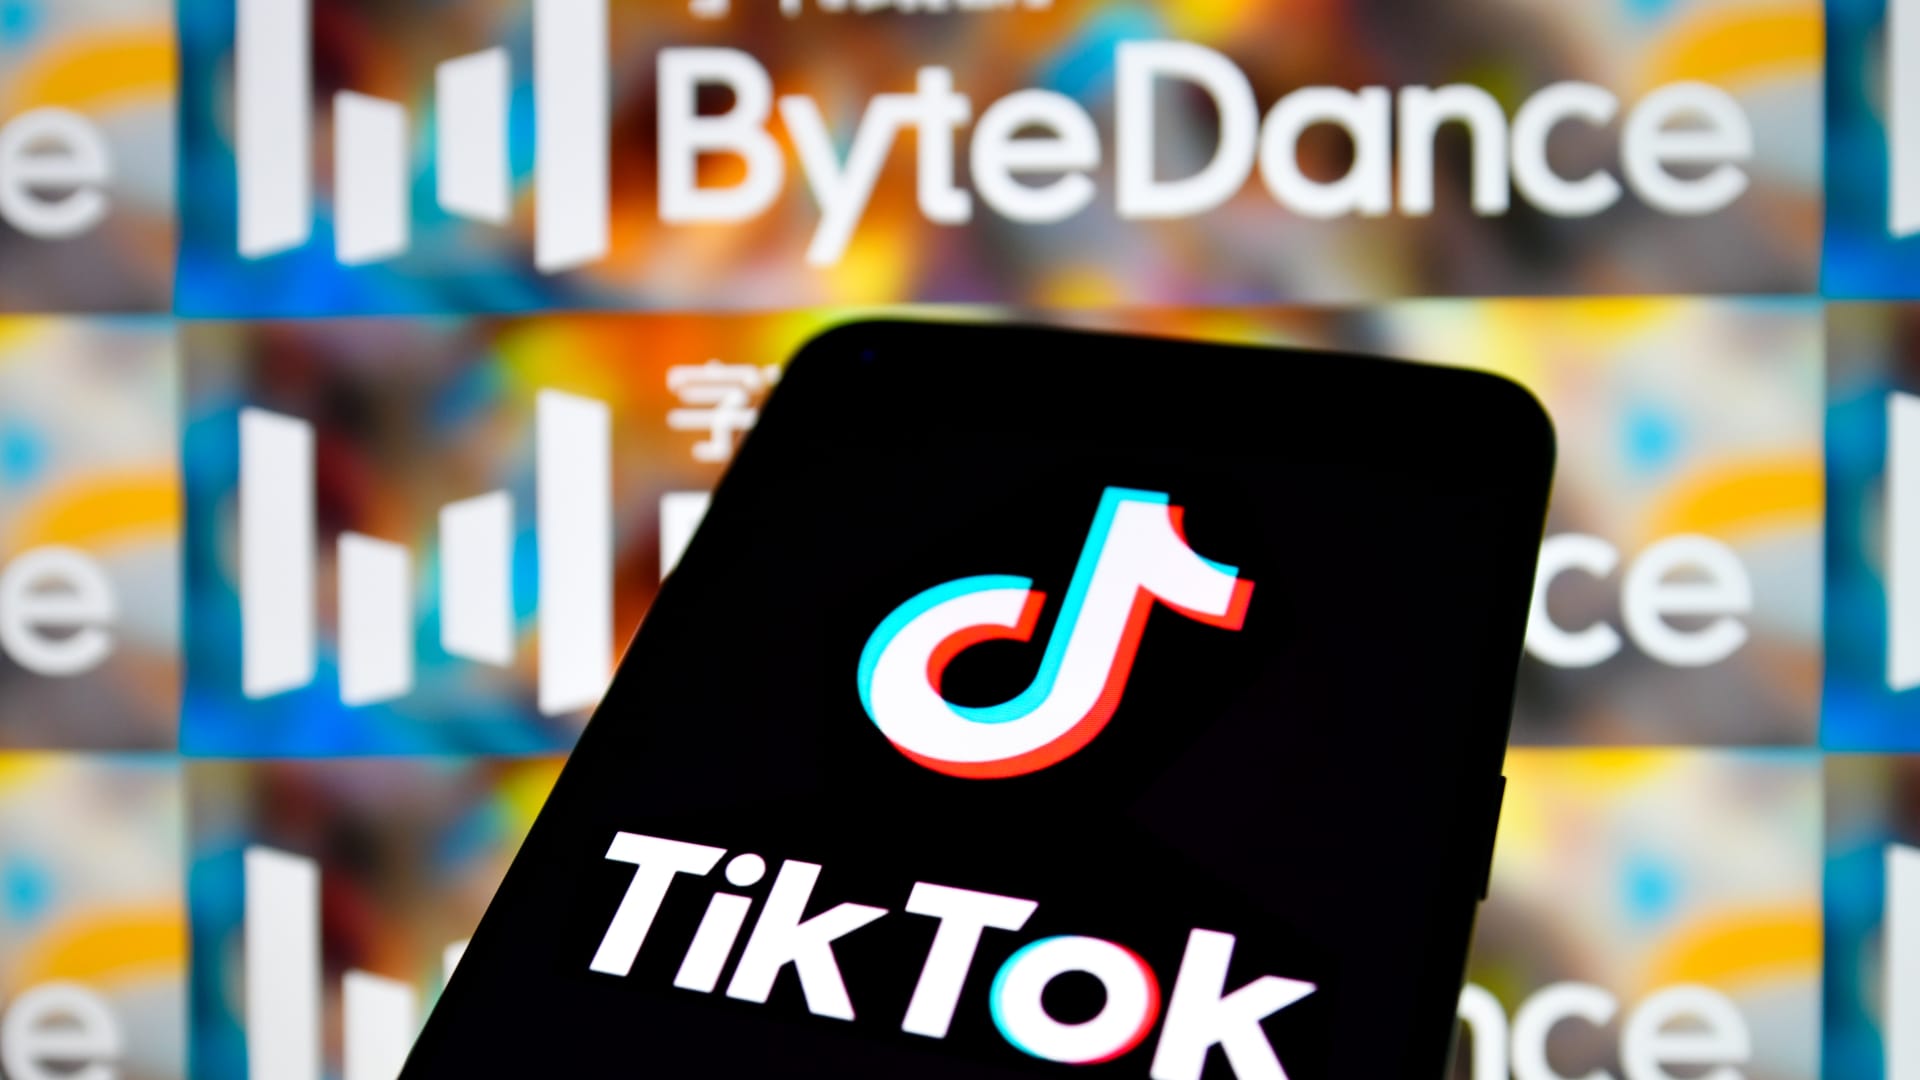 TikTok parent ByteDance offers share buyback valuing the Chinese giant at 8 billion